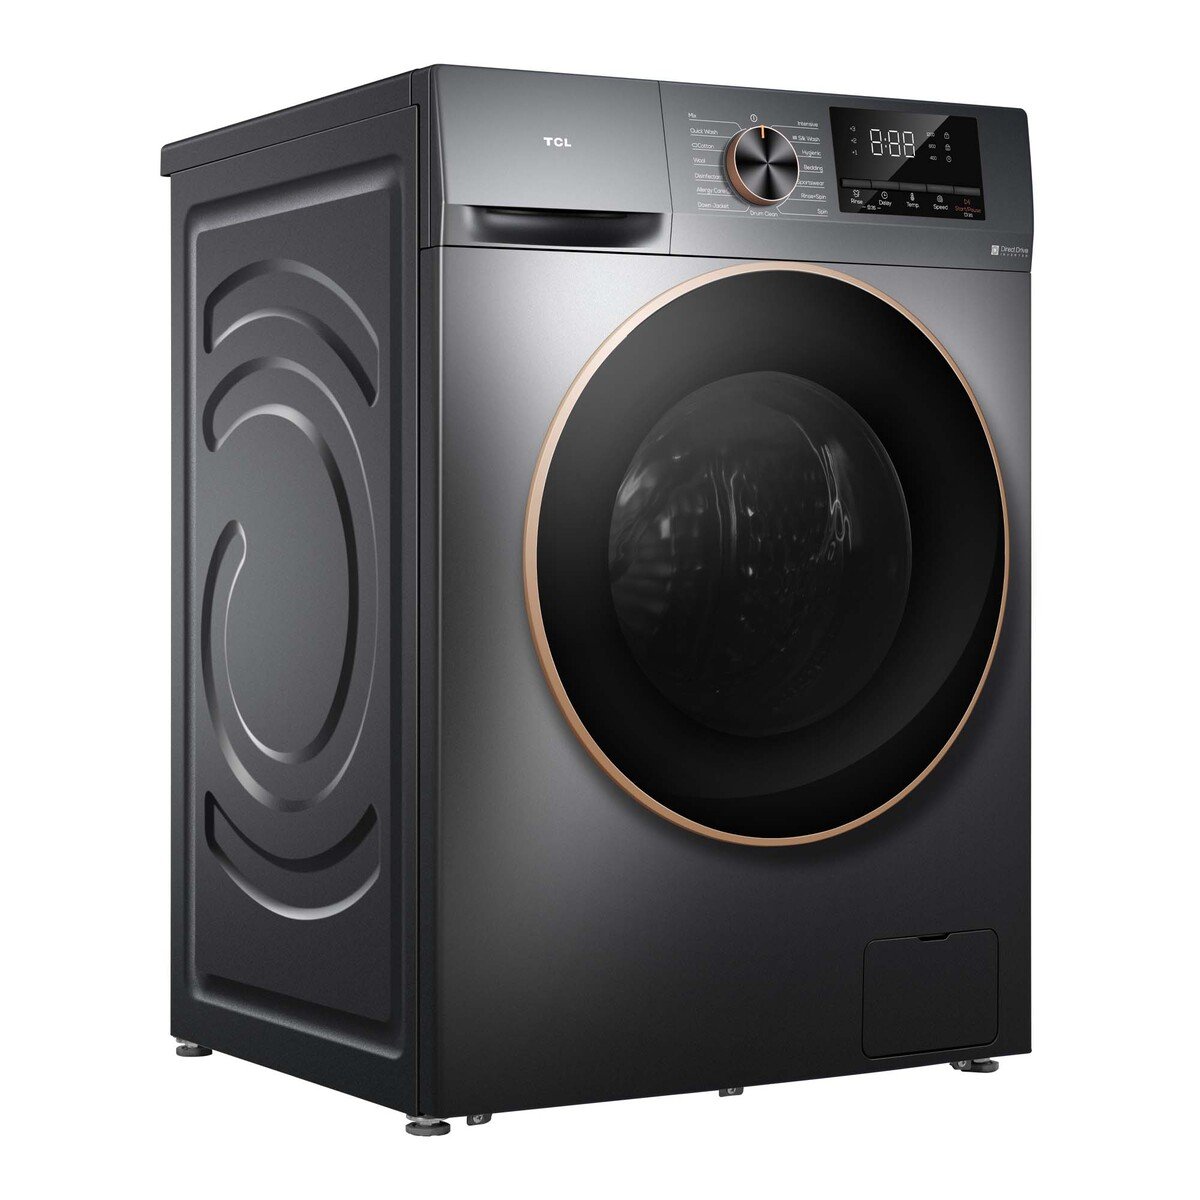 TCL Fully Automatic Front Loading Washing Machine, 10 Kg, 1200 RPM, Dark Grey, P210FLG